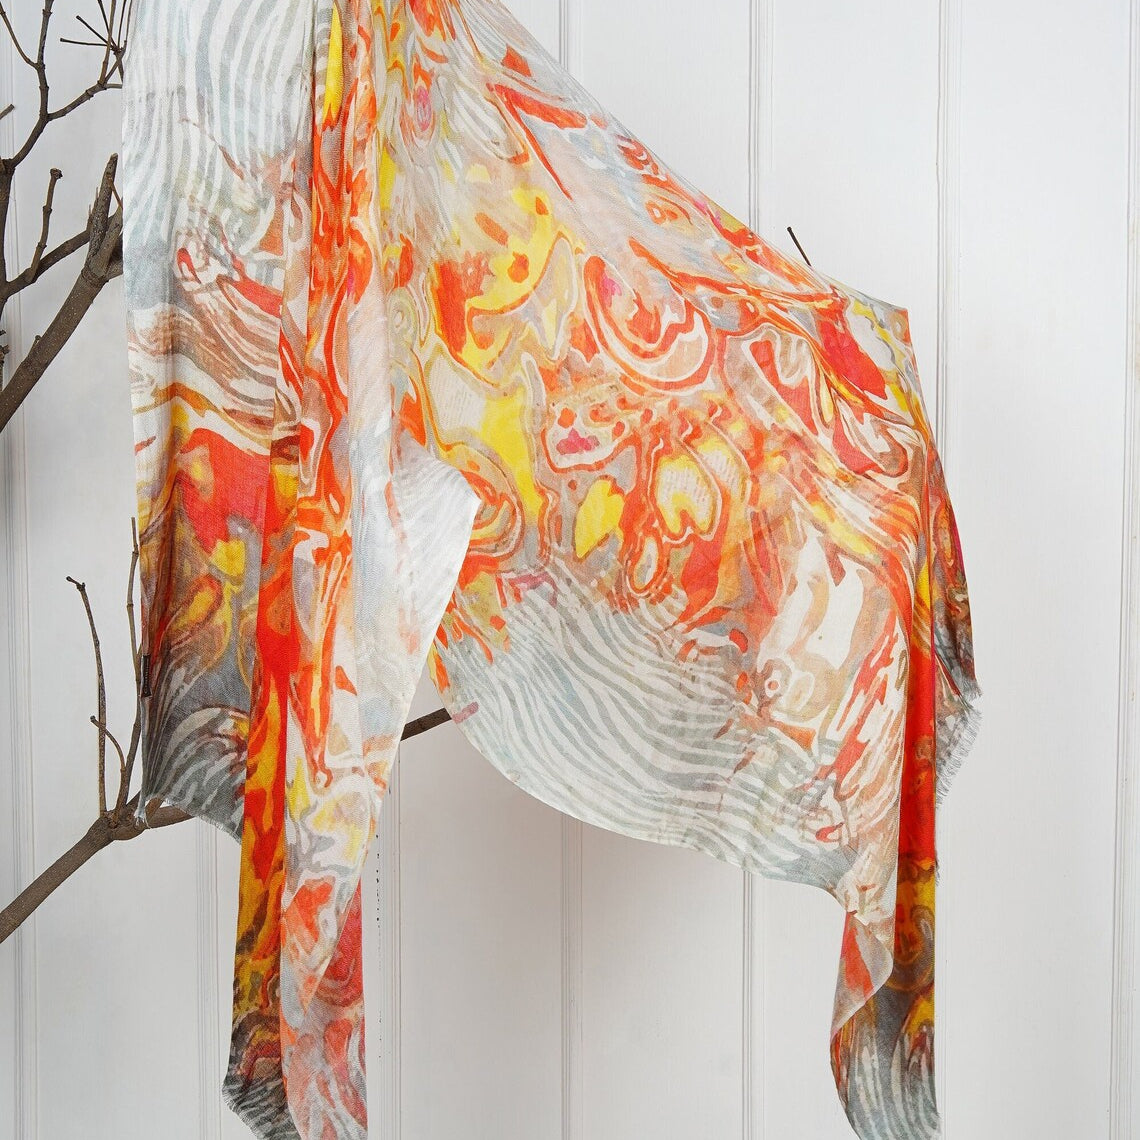 Silk Modal Scarf, long all season scarf in luxurious fabric blend, shawl and wrap, accessories for women, gifts for her, summer scarf, shawl - Cream/Orange